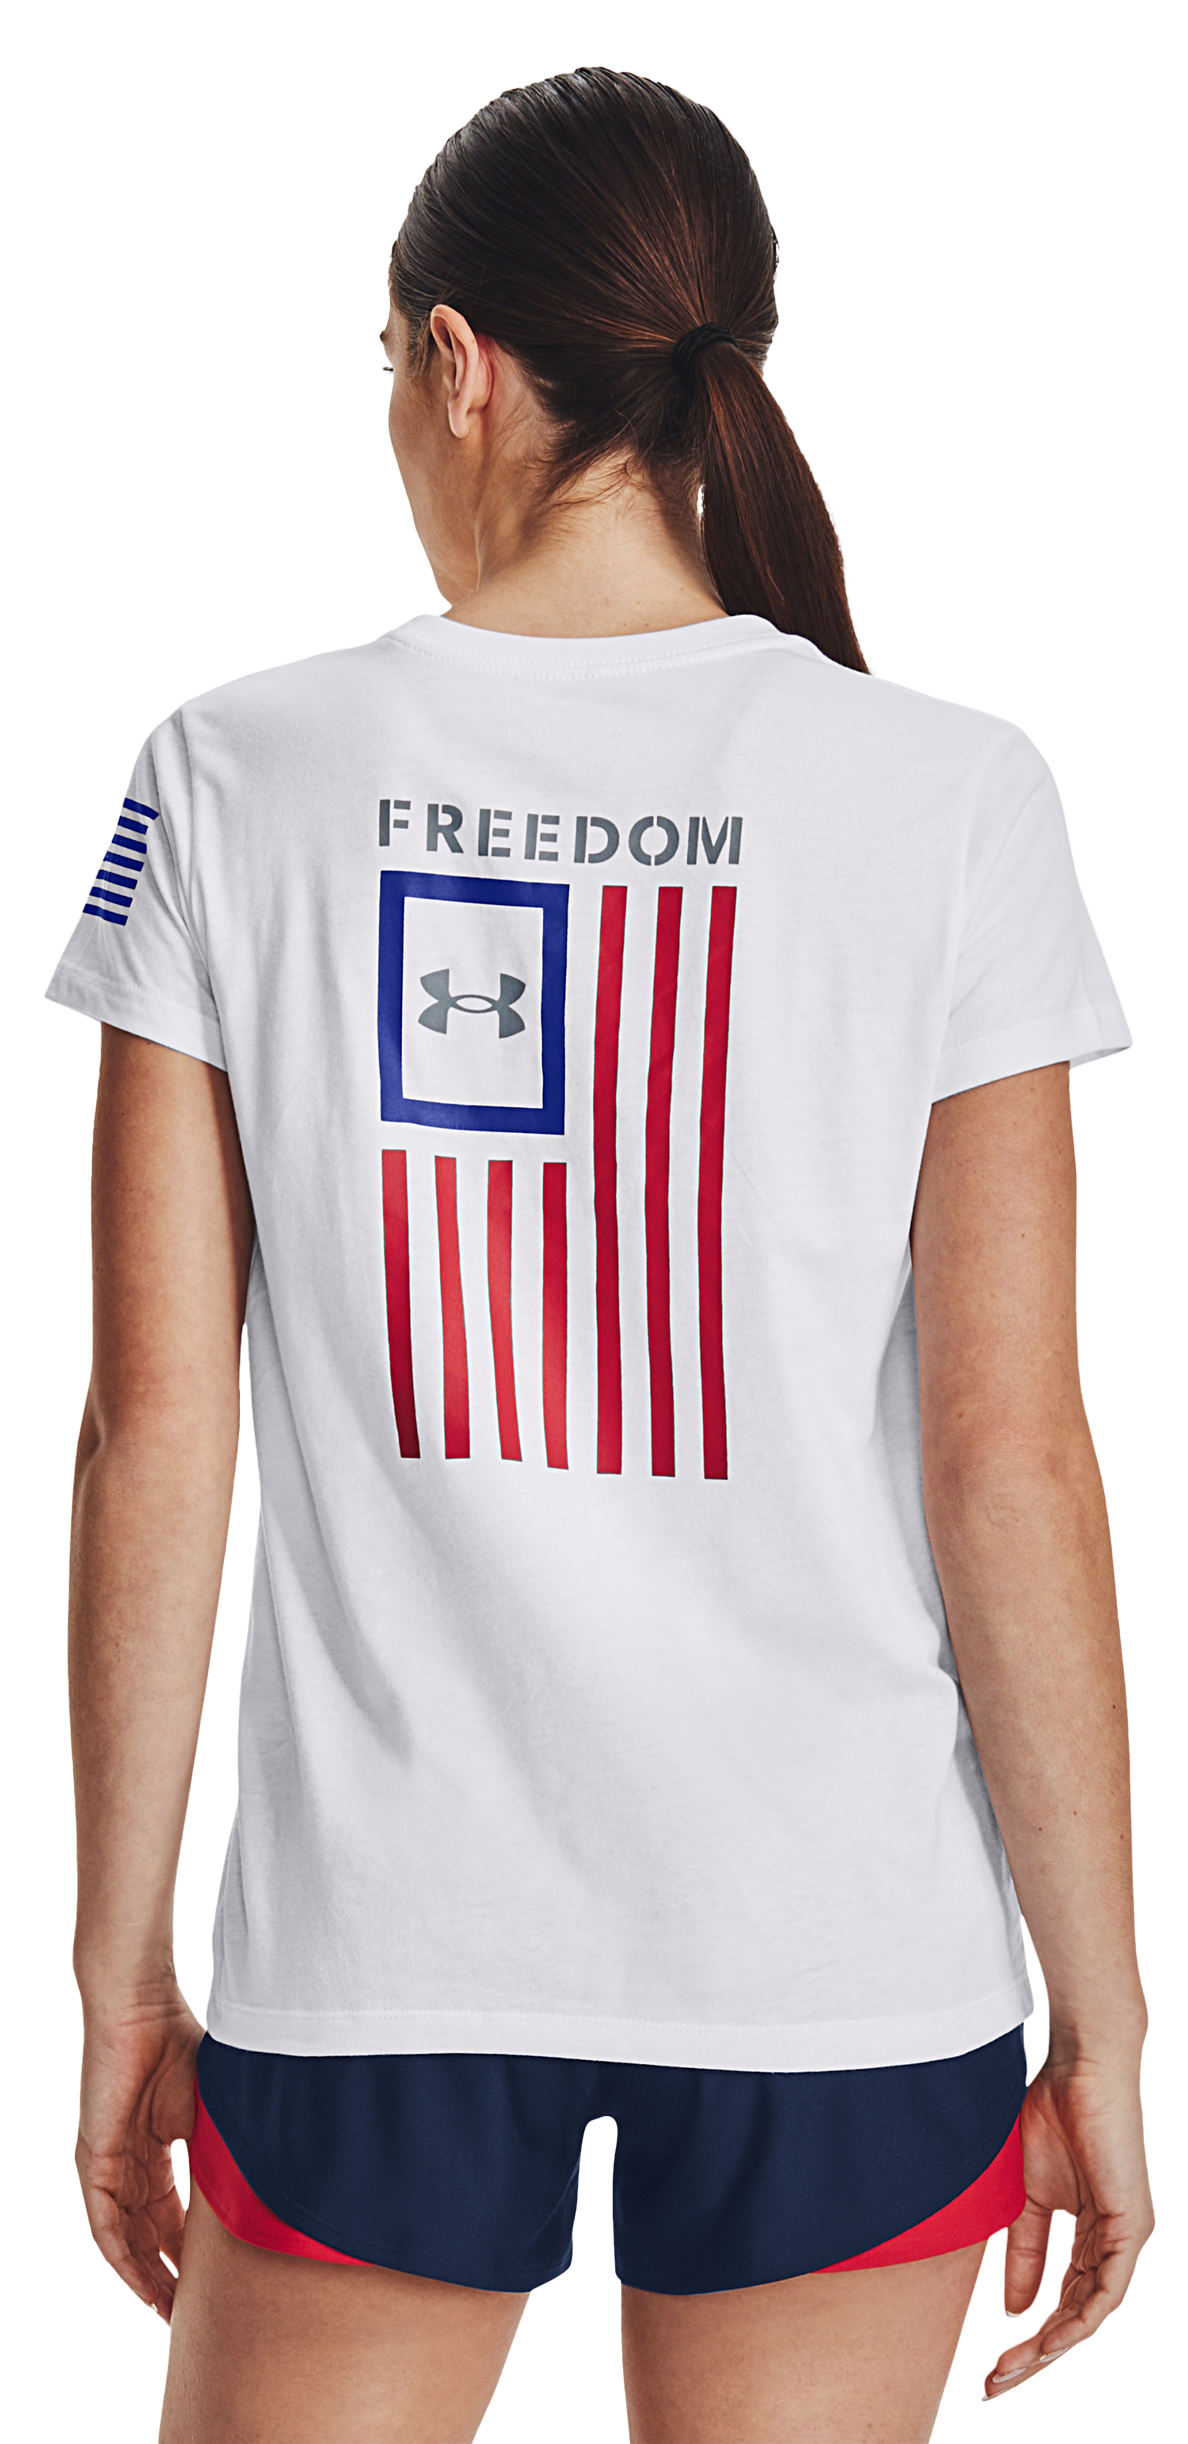 Under Armour New Freedom Flag Short-Sleeve T-Shirt for Ladies